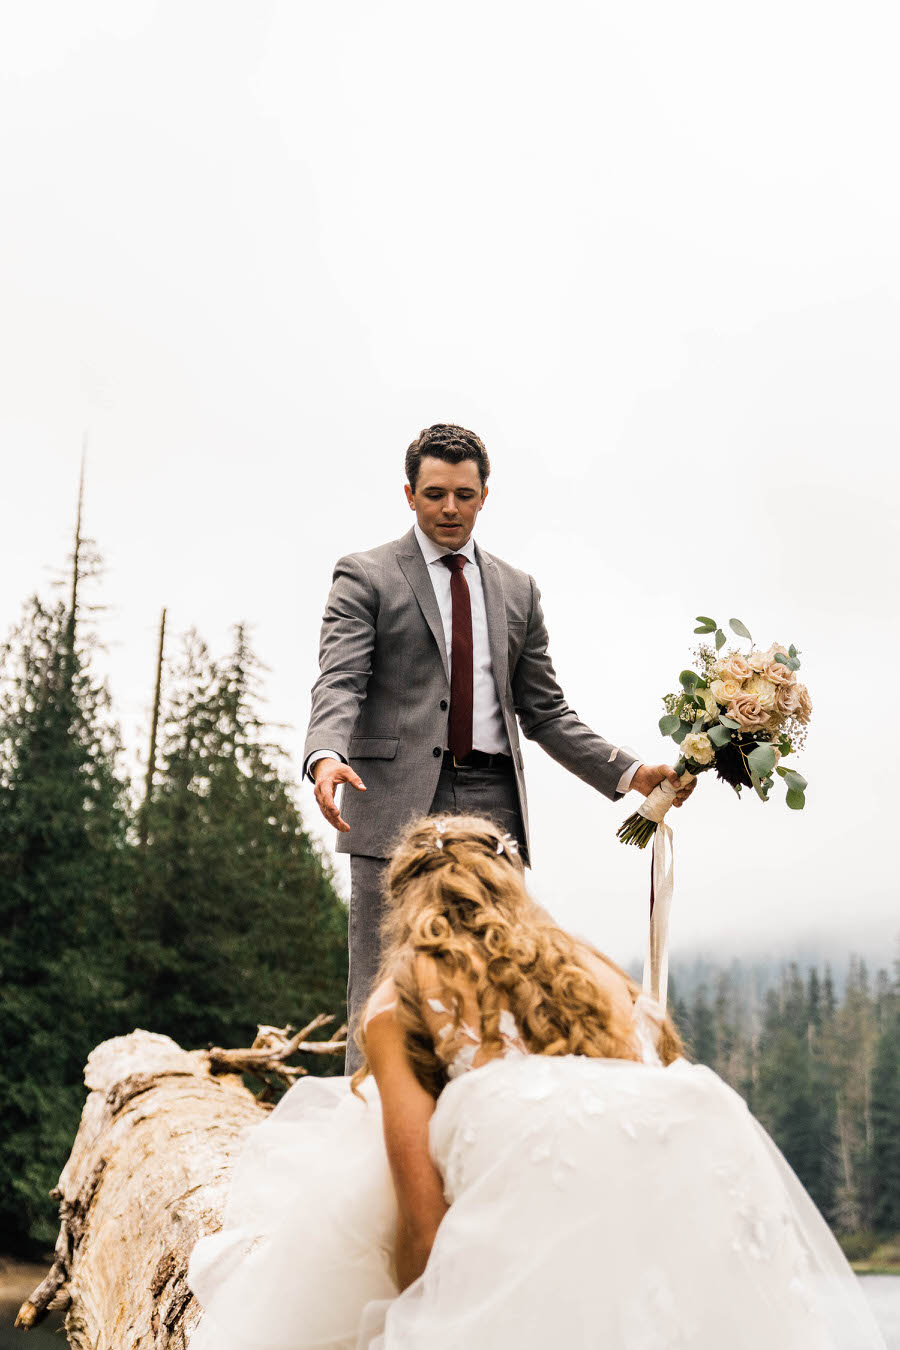 A groom reaches down for his bride's hand as they climb up a giant fallen log